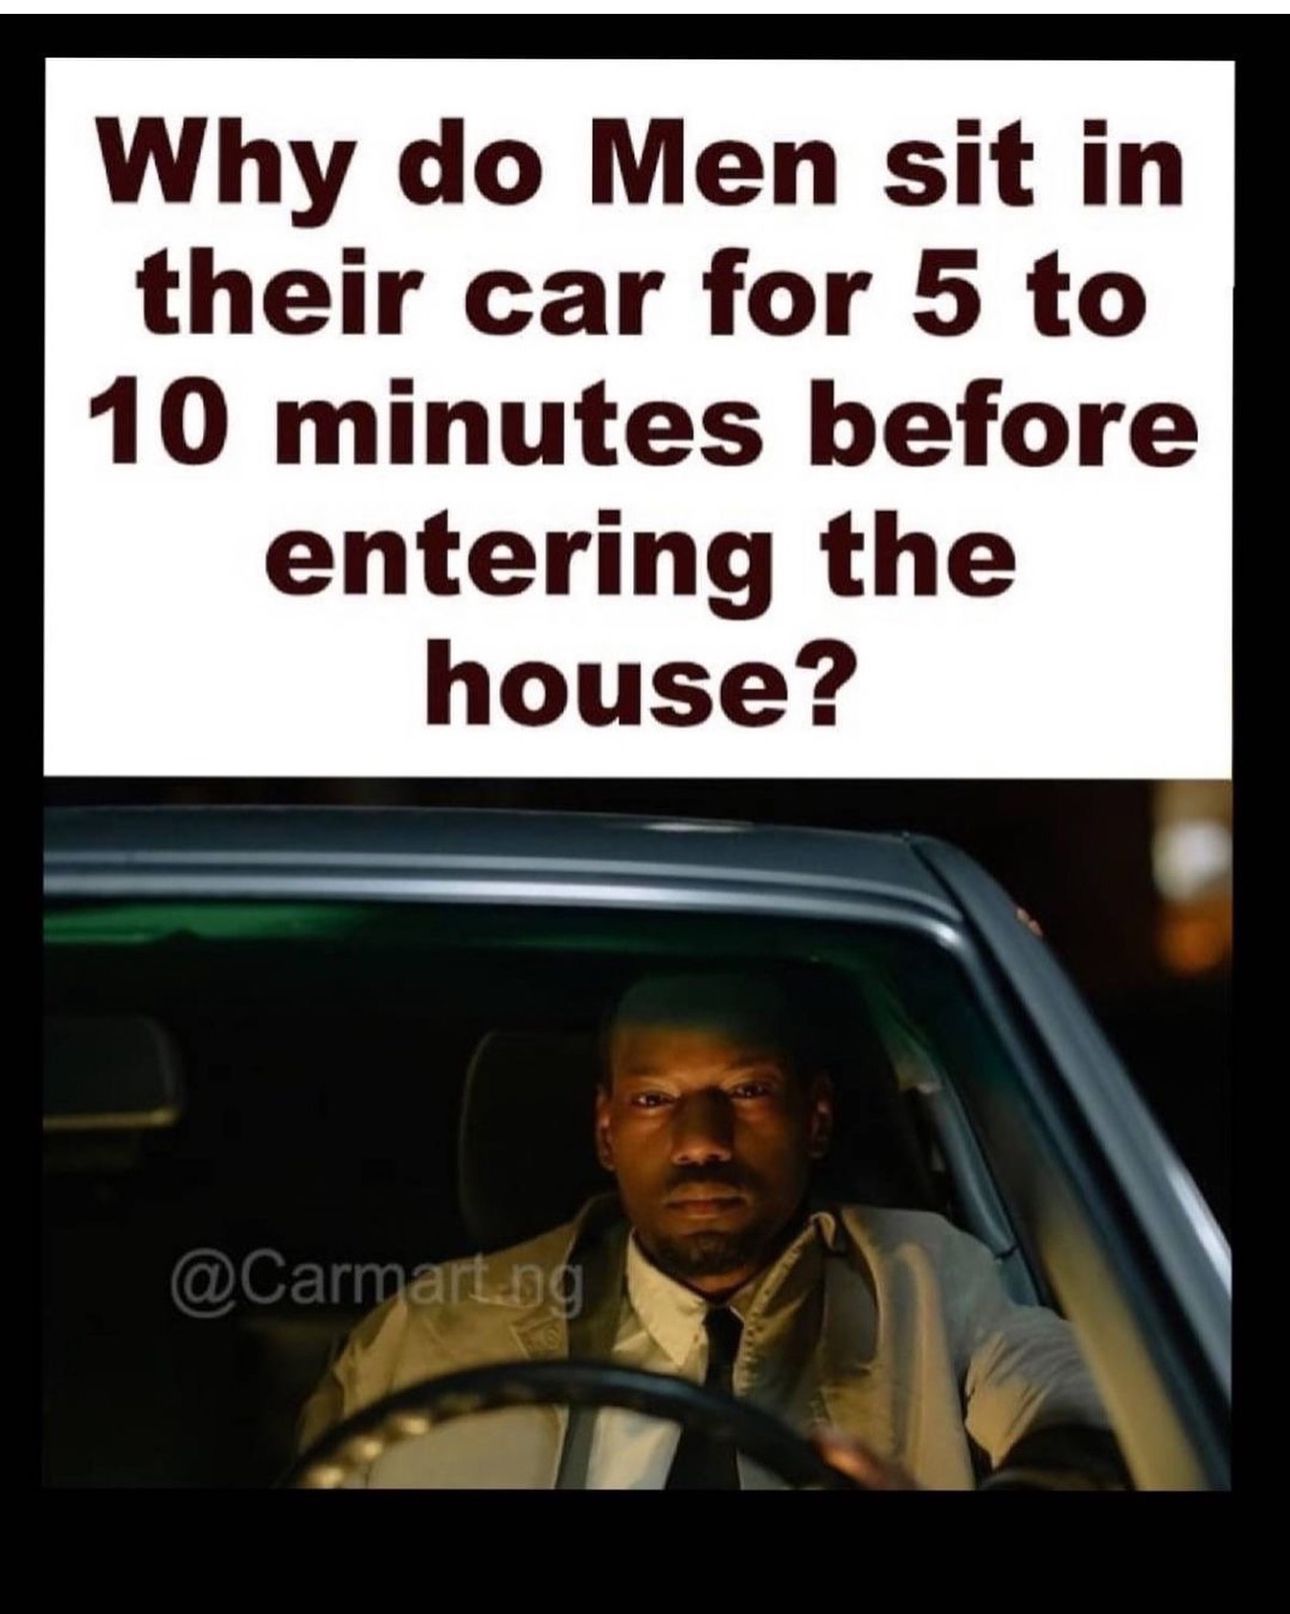 Why do Men sit in their car for 5 to 10 minutes before entering the house?